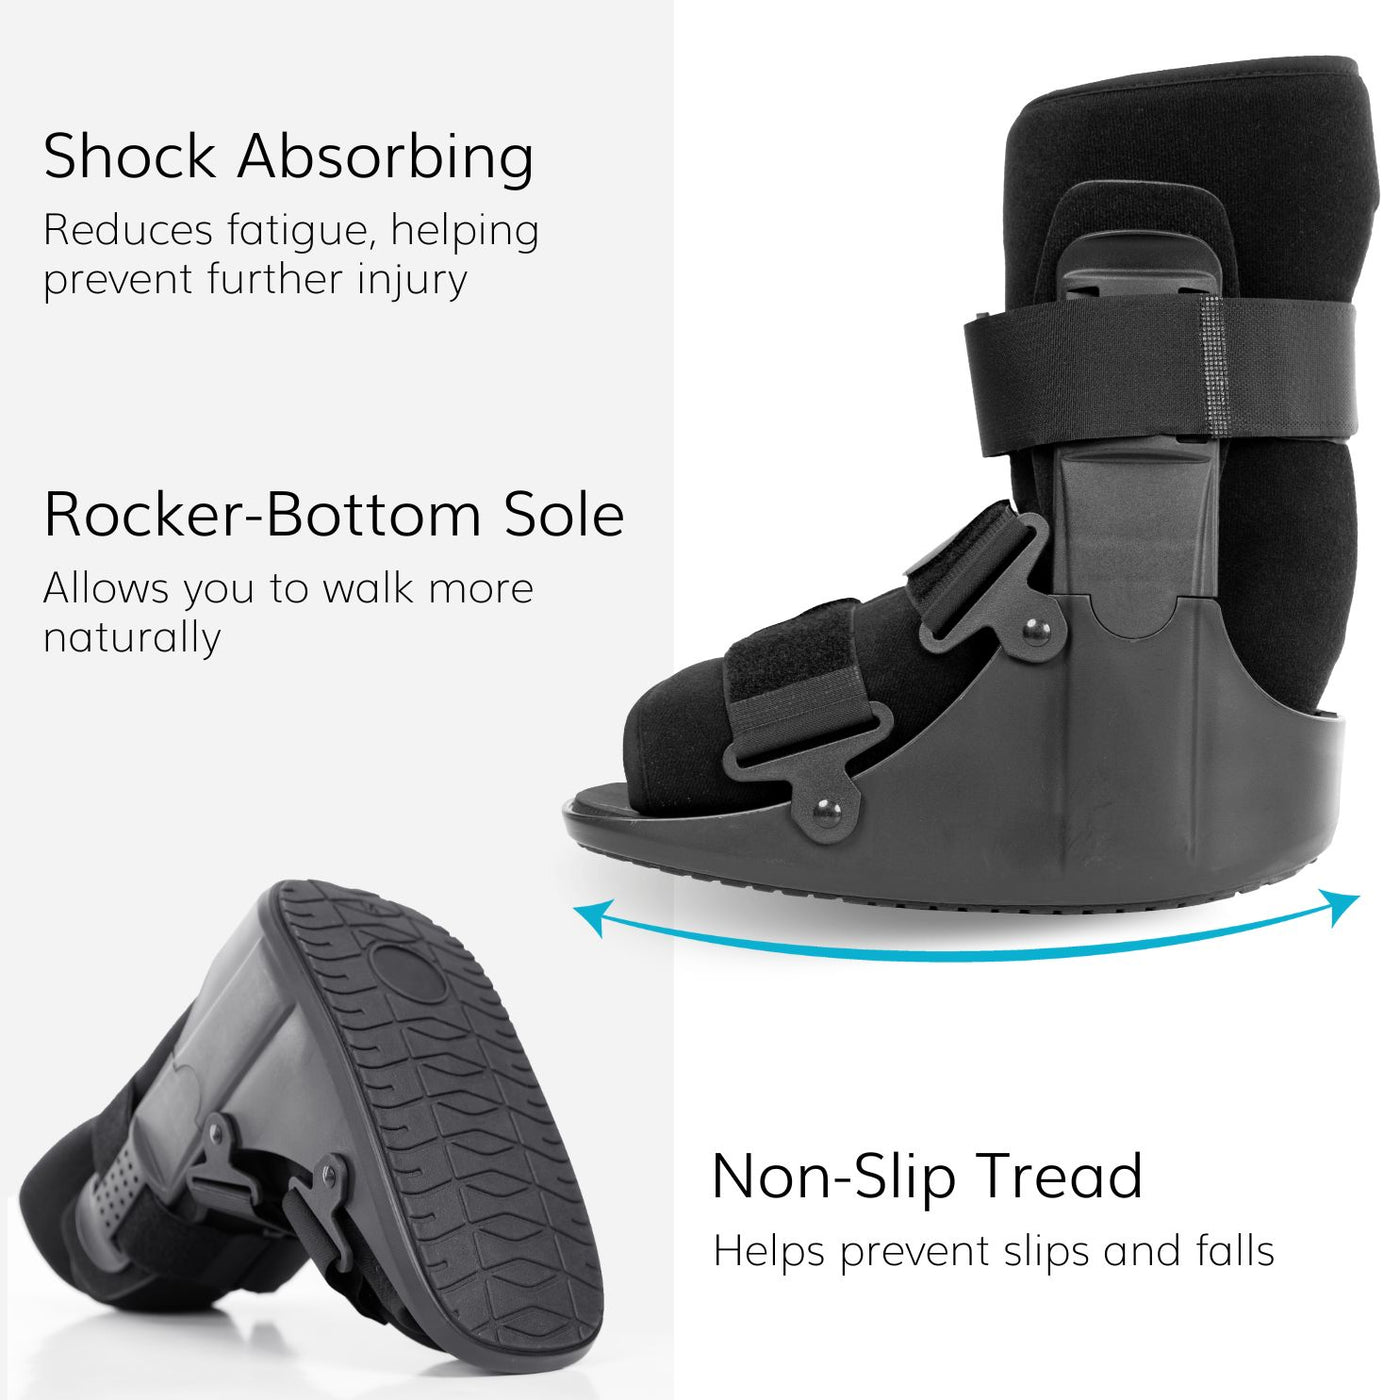 Boot can also help with fractured toes, sprained feet or ankles, plantar ulcers, and post bunionectomy